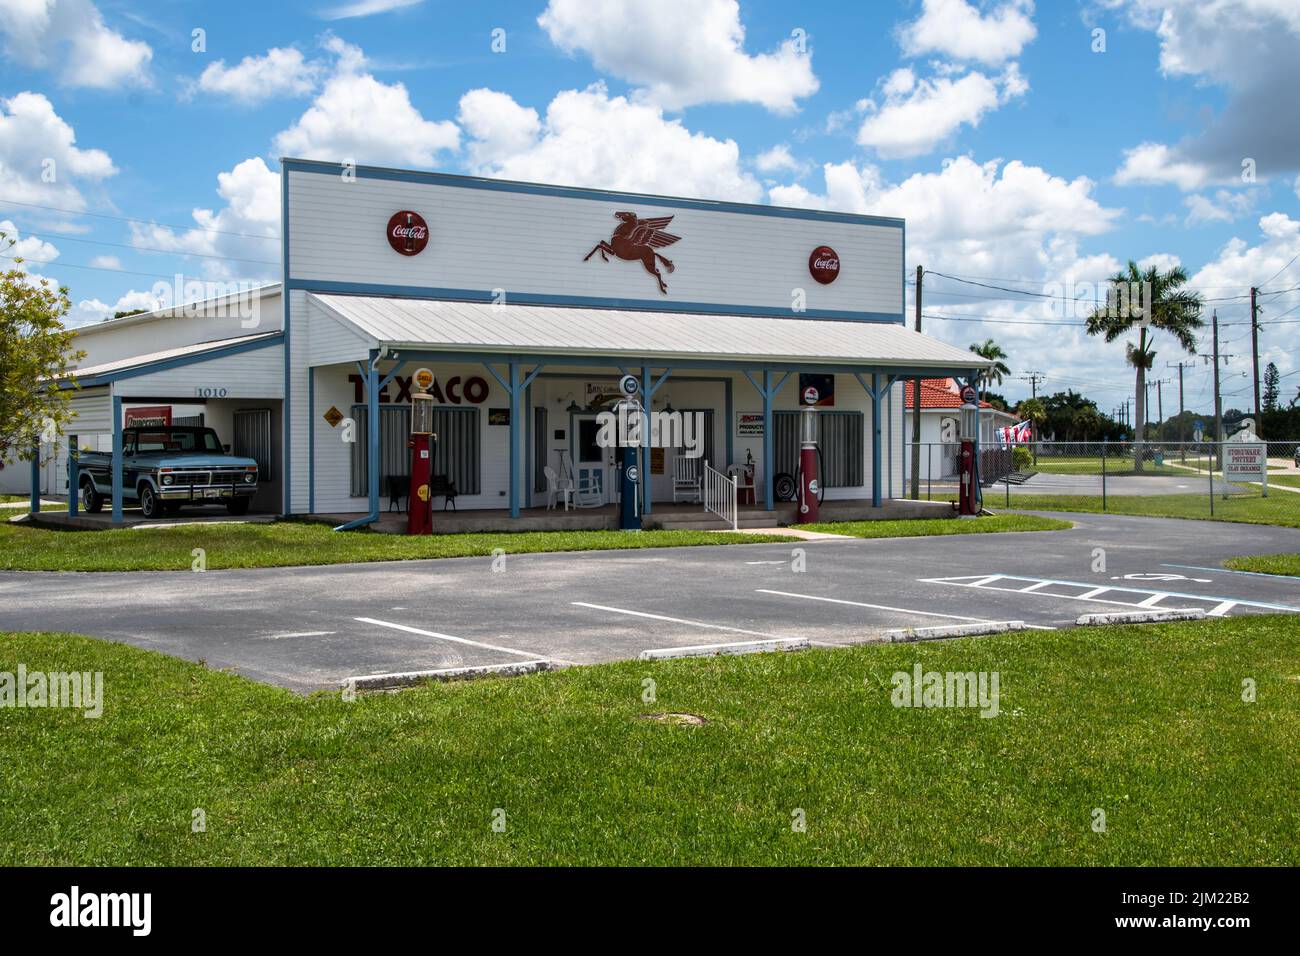 Vintage Historic Gas Station with Vintage Pumps in Punta Gorda, Florida, Charlotte County, Southwest Florida's Gulf Coast small towns. vintage signs Stock Photo